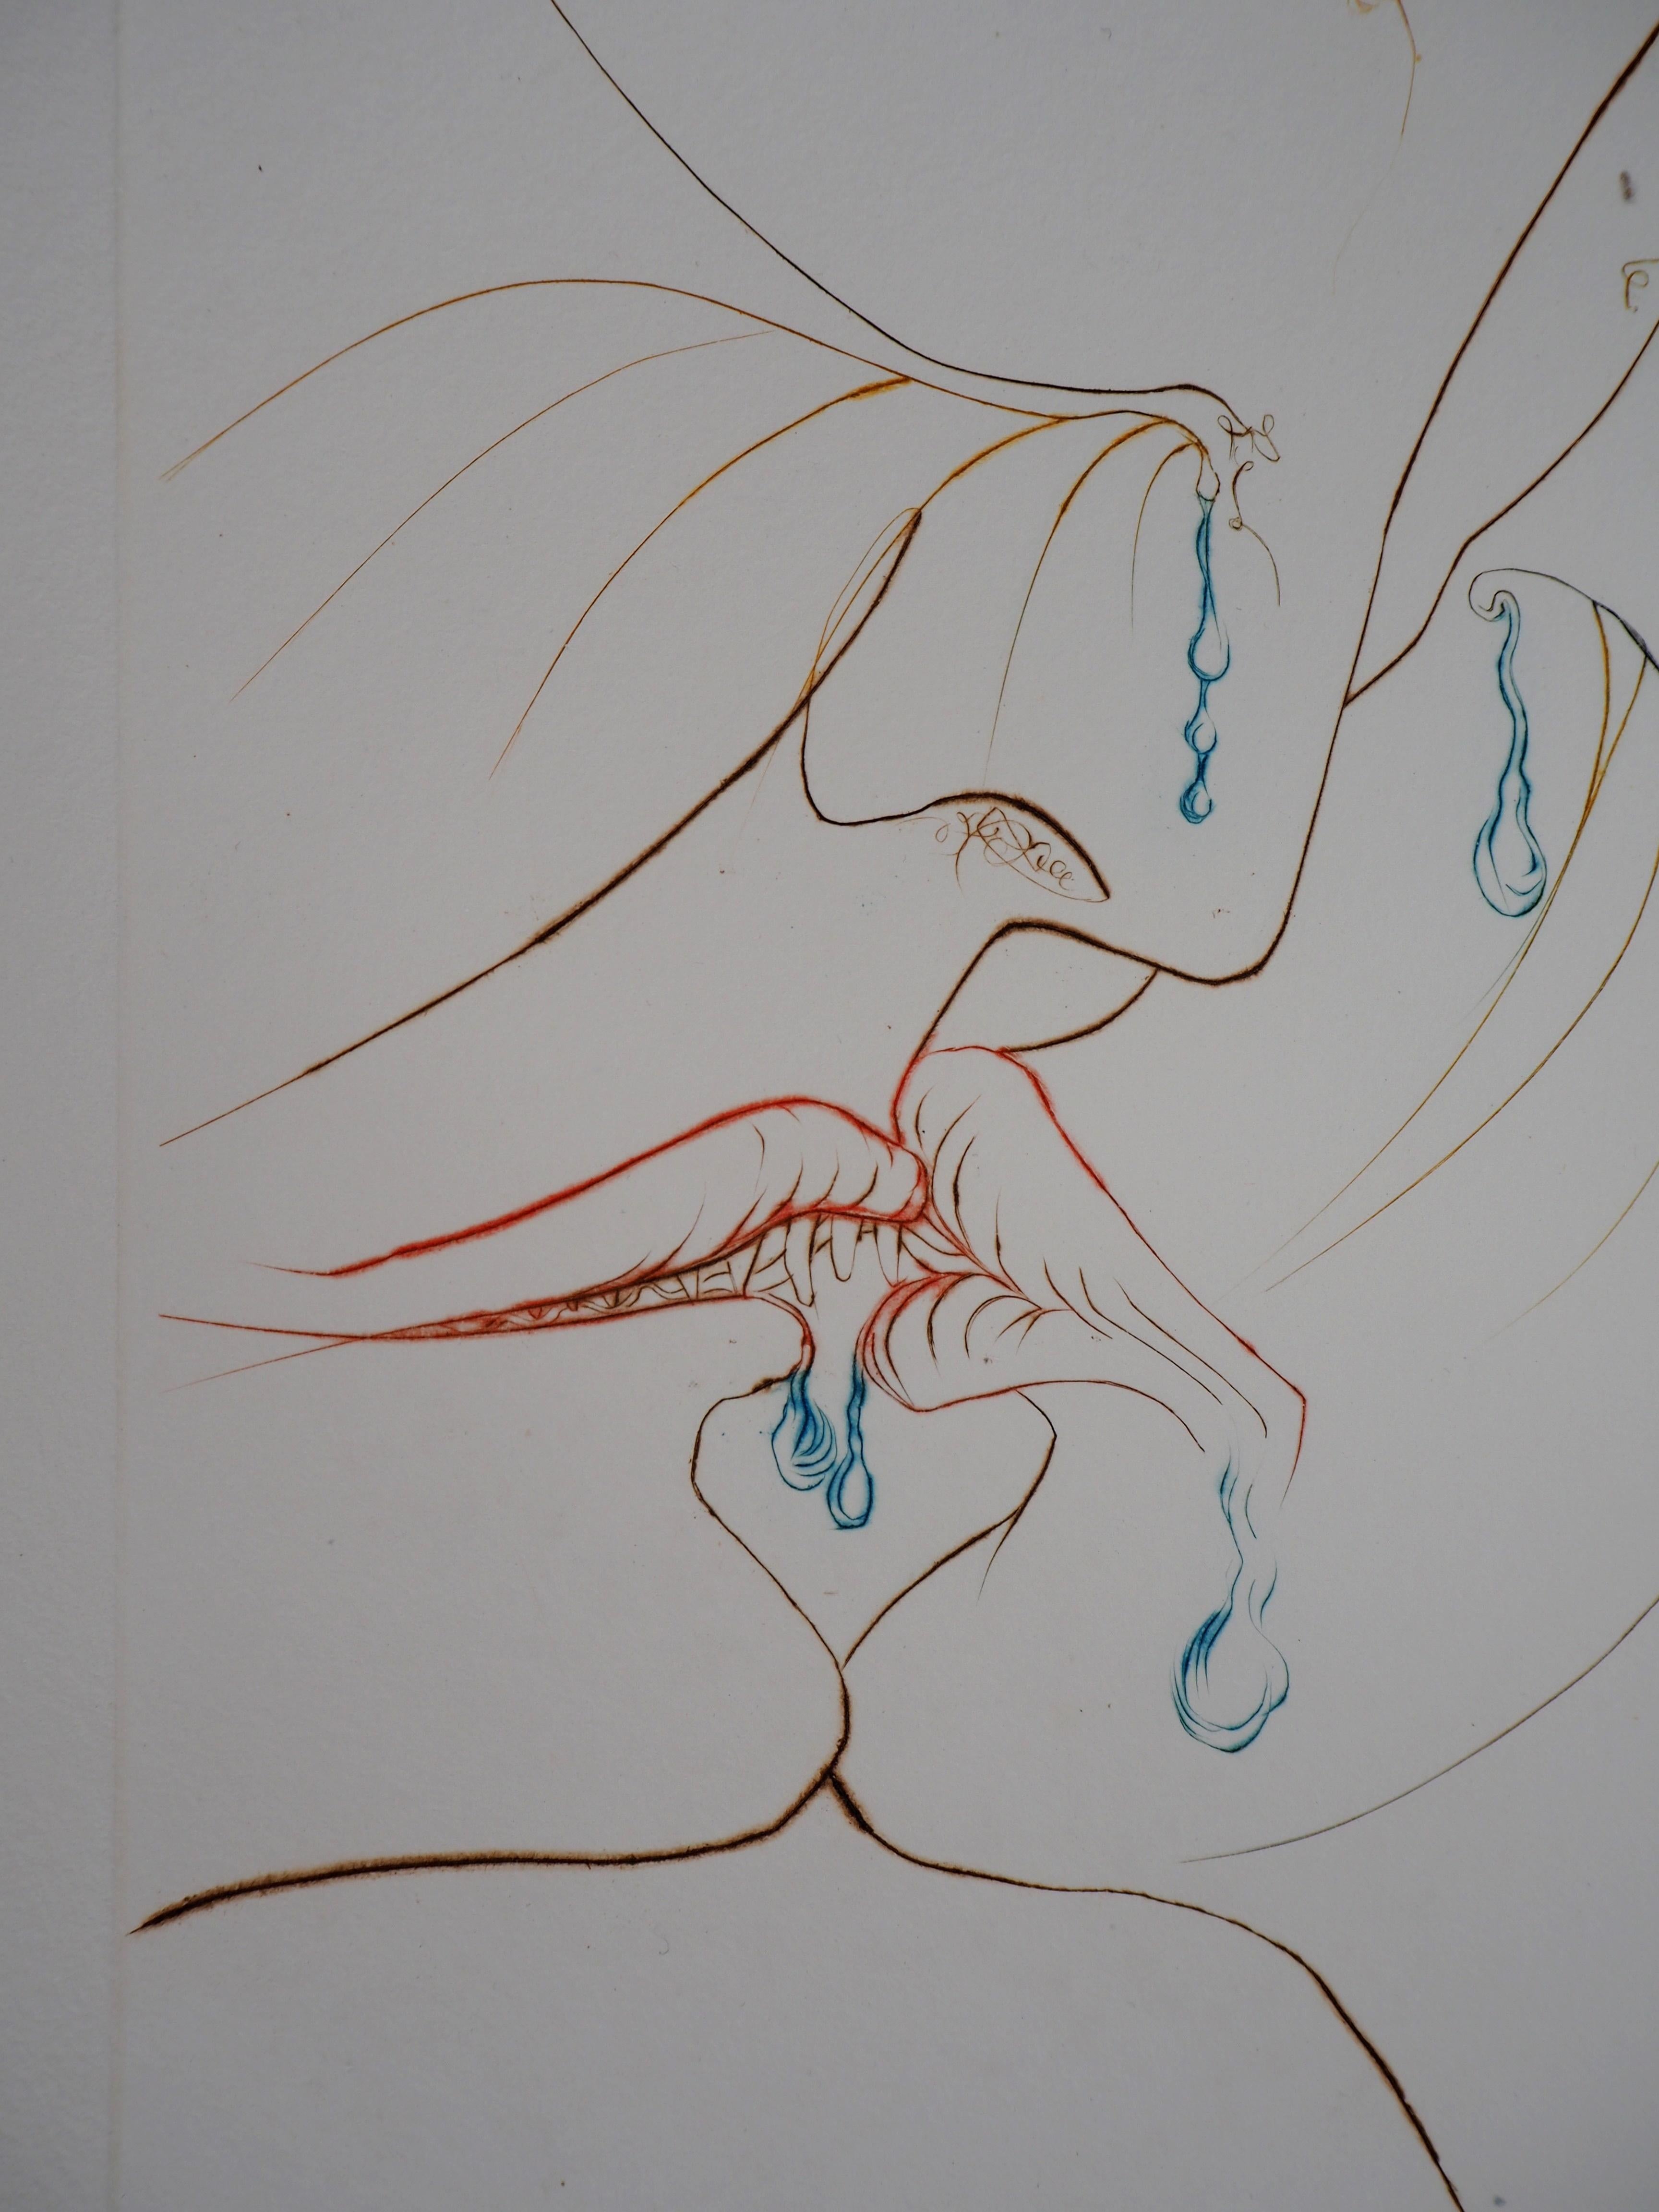 Milton, Lost Paradise : The Kiss - Original Hand Signed Etching, 1974 - Gray Figurative Print by Salvador Dalí